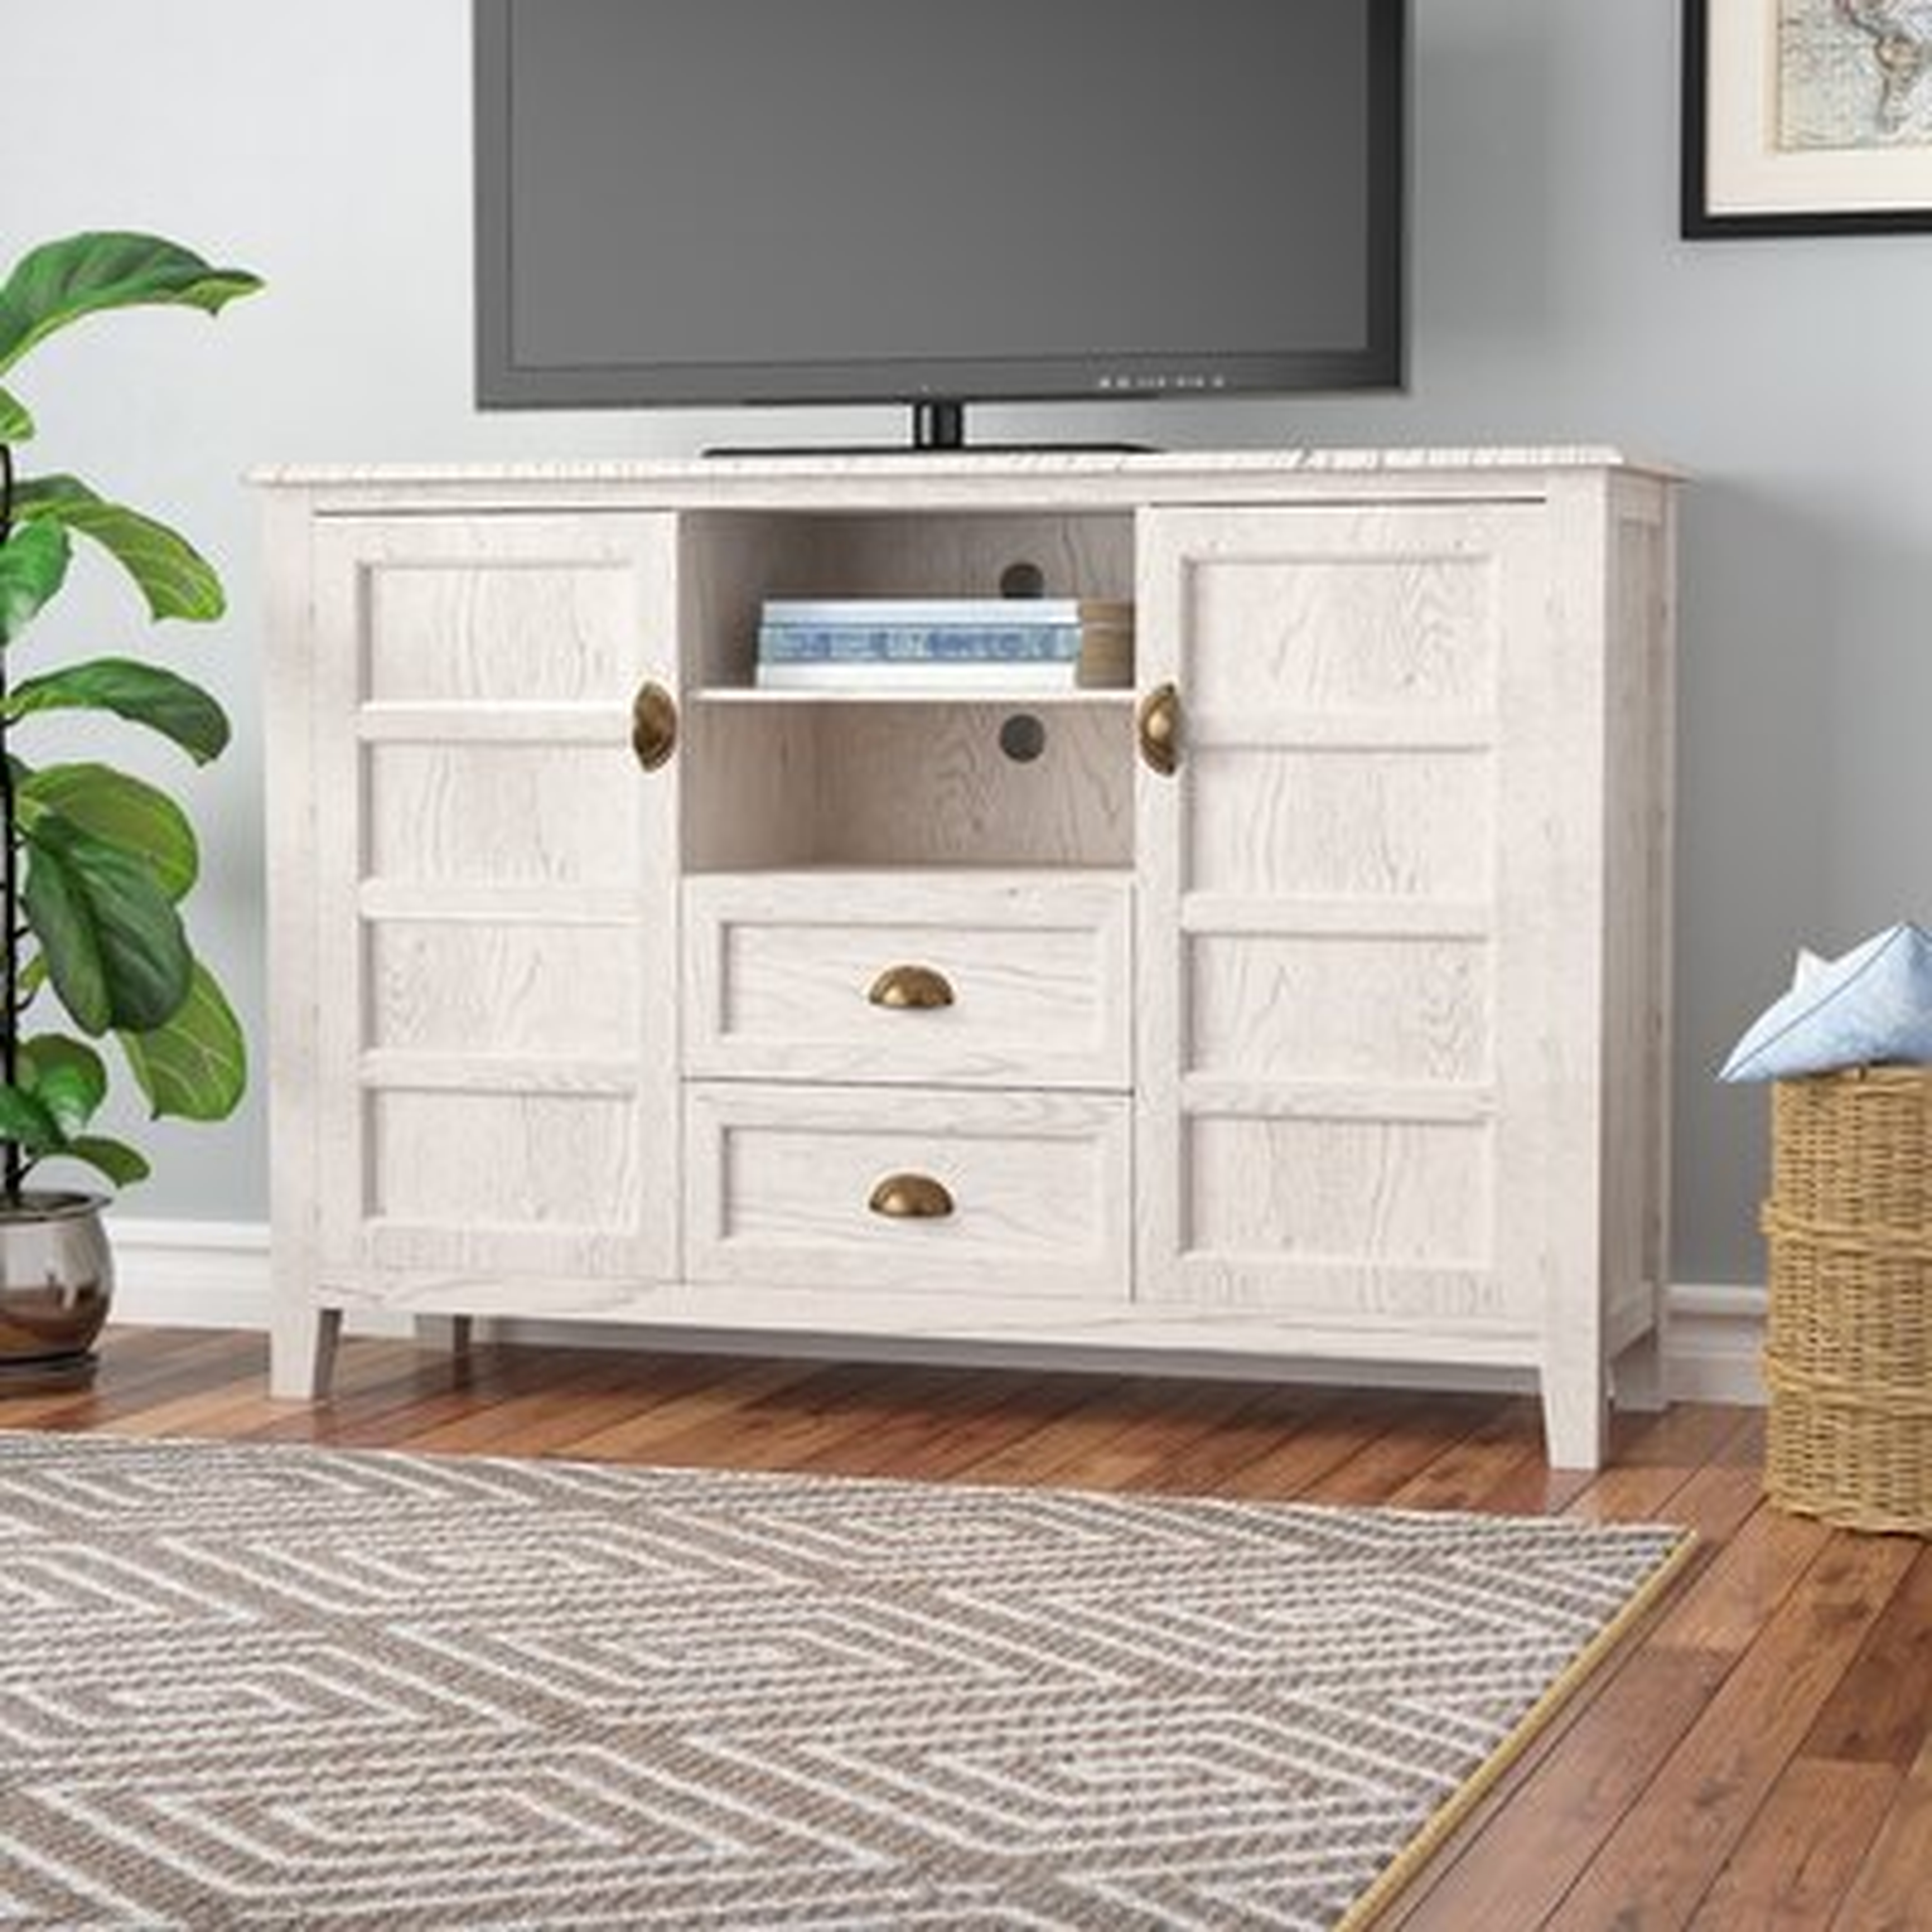 Theodulus TV Stand for TVs up to 58" - Wayfair